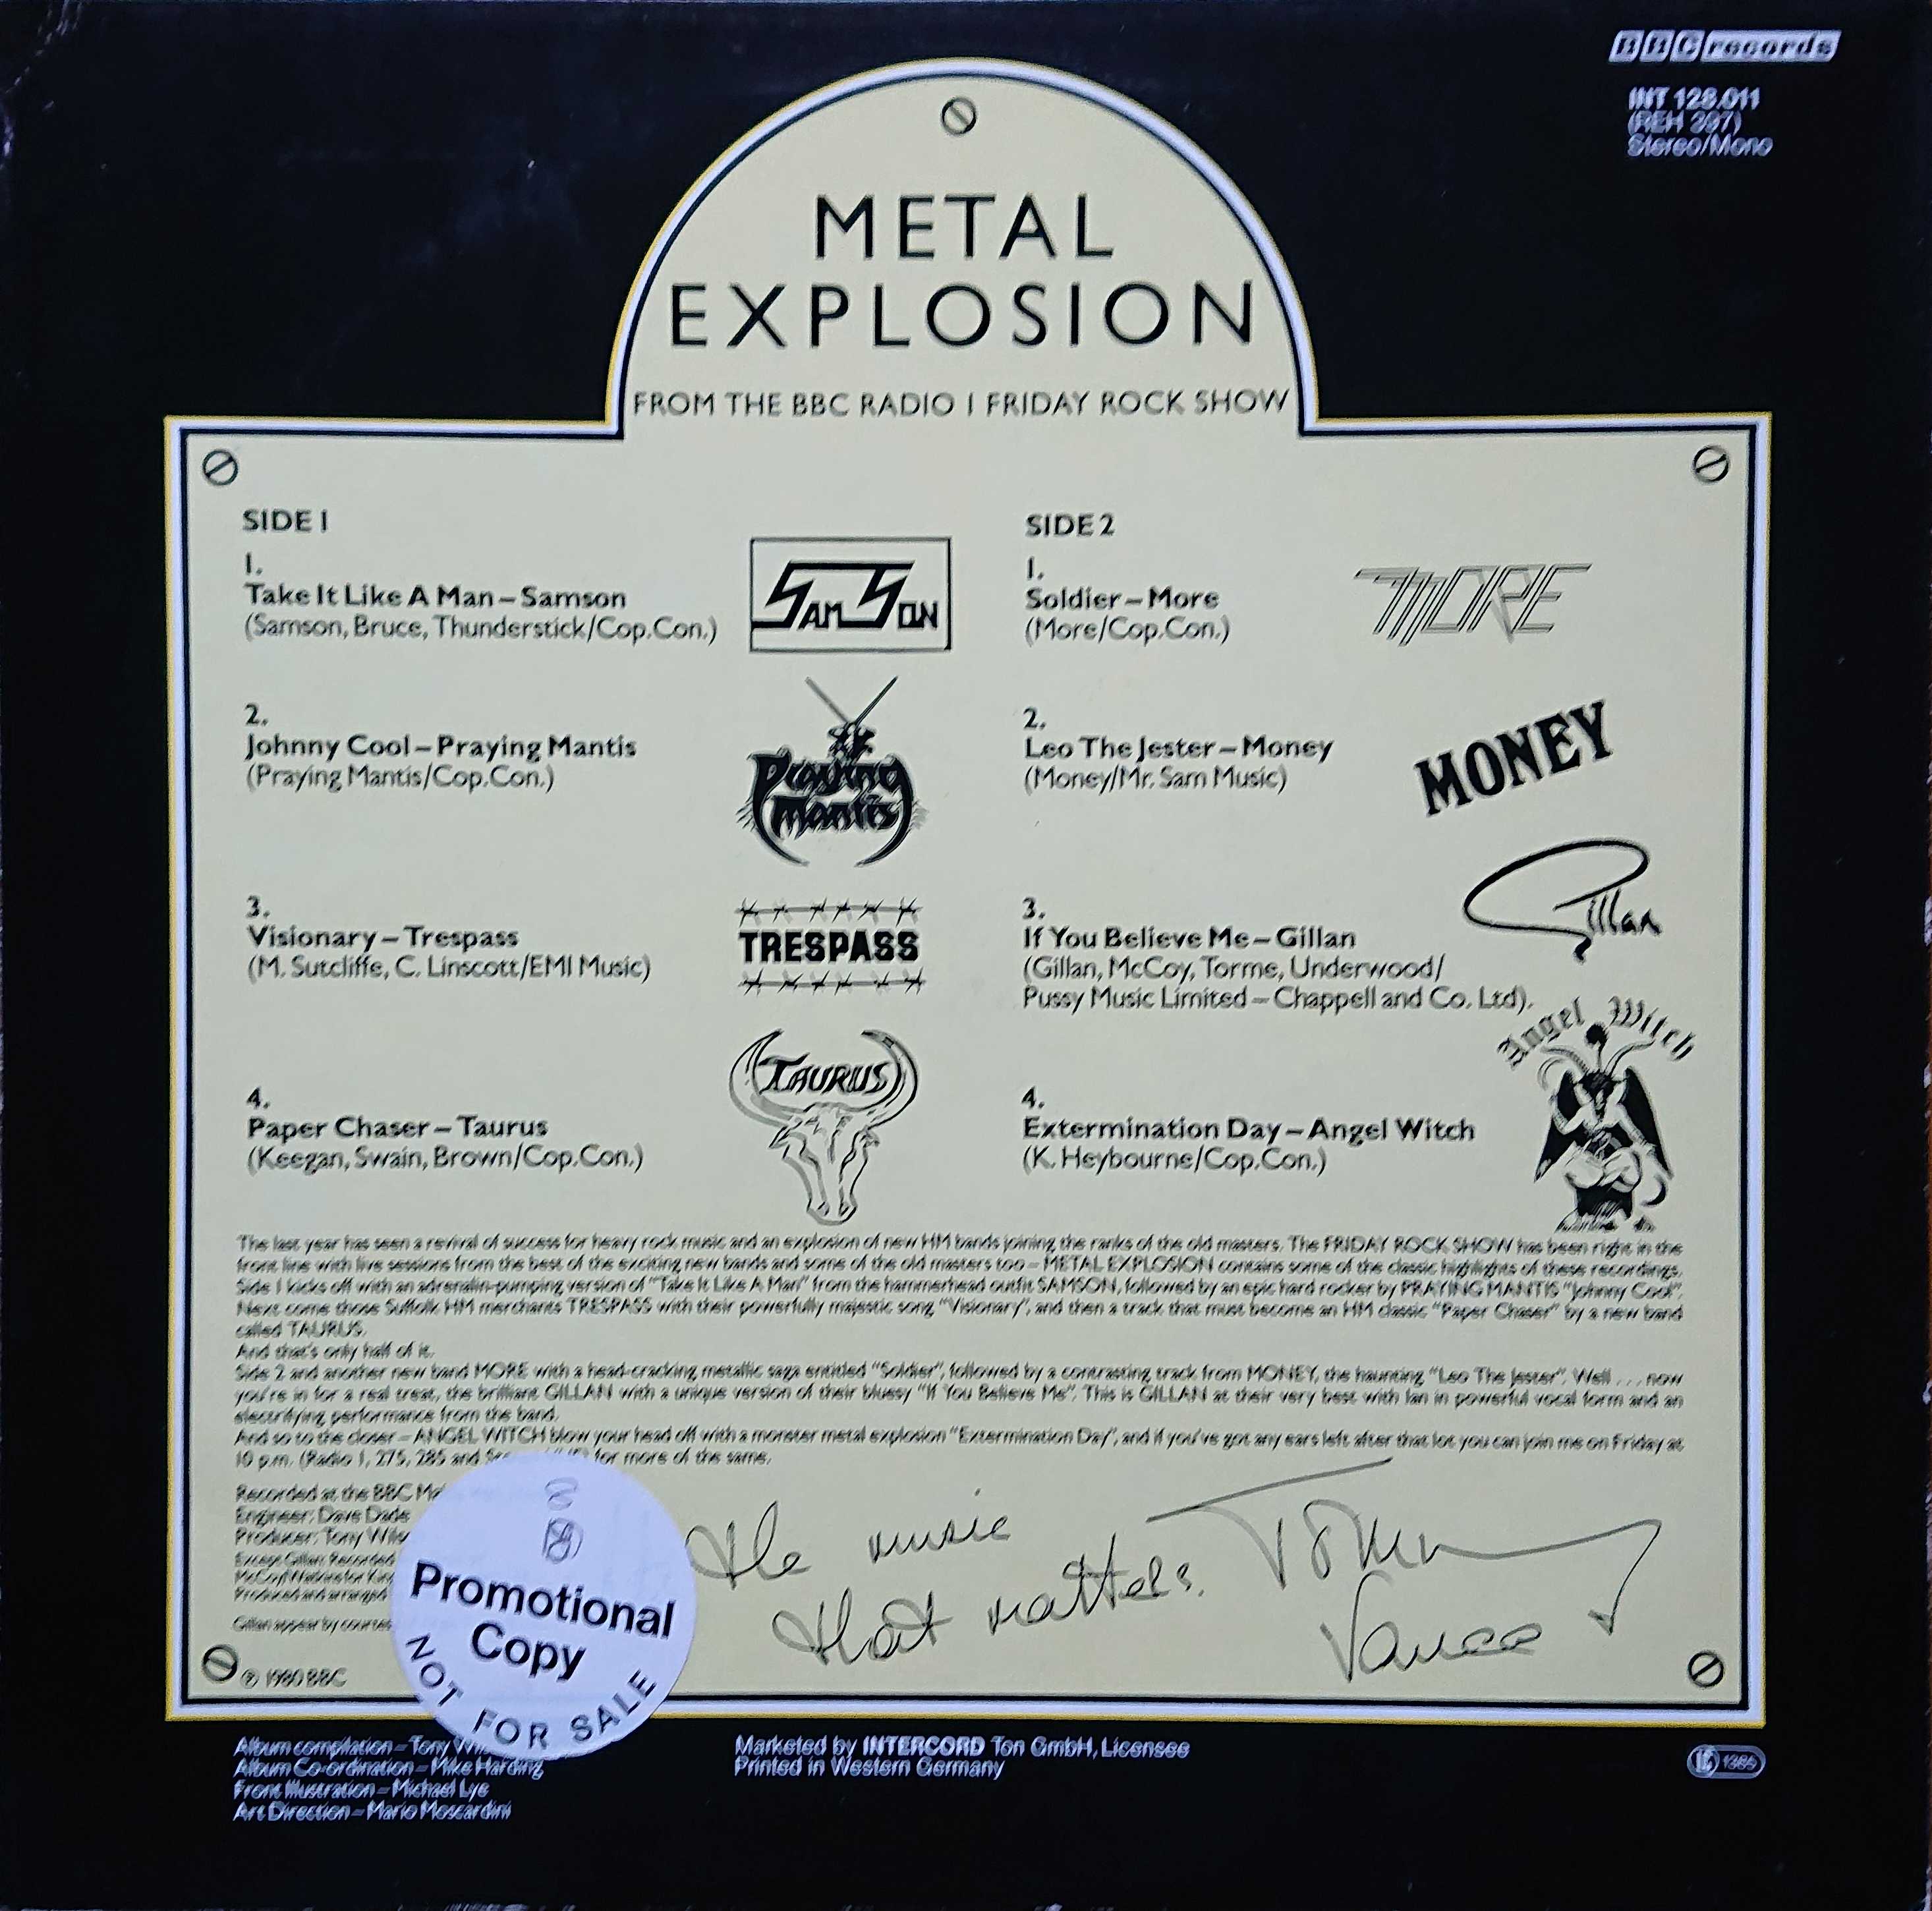 Picture of INT 128.011 Metal explosion from the Friday Rock Show by artist Various from the BBC records and Tapes library